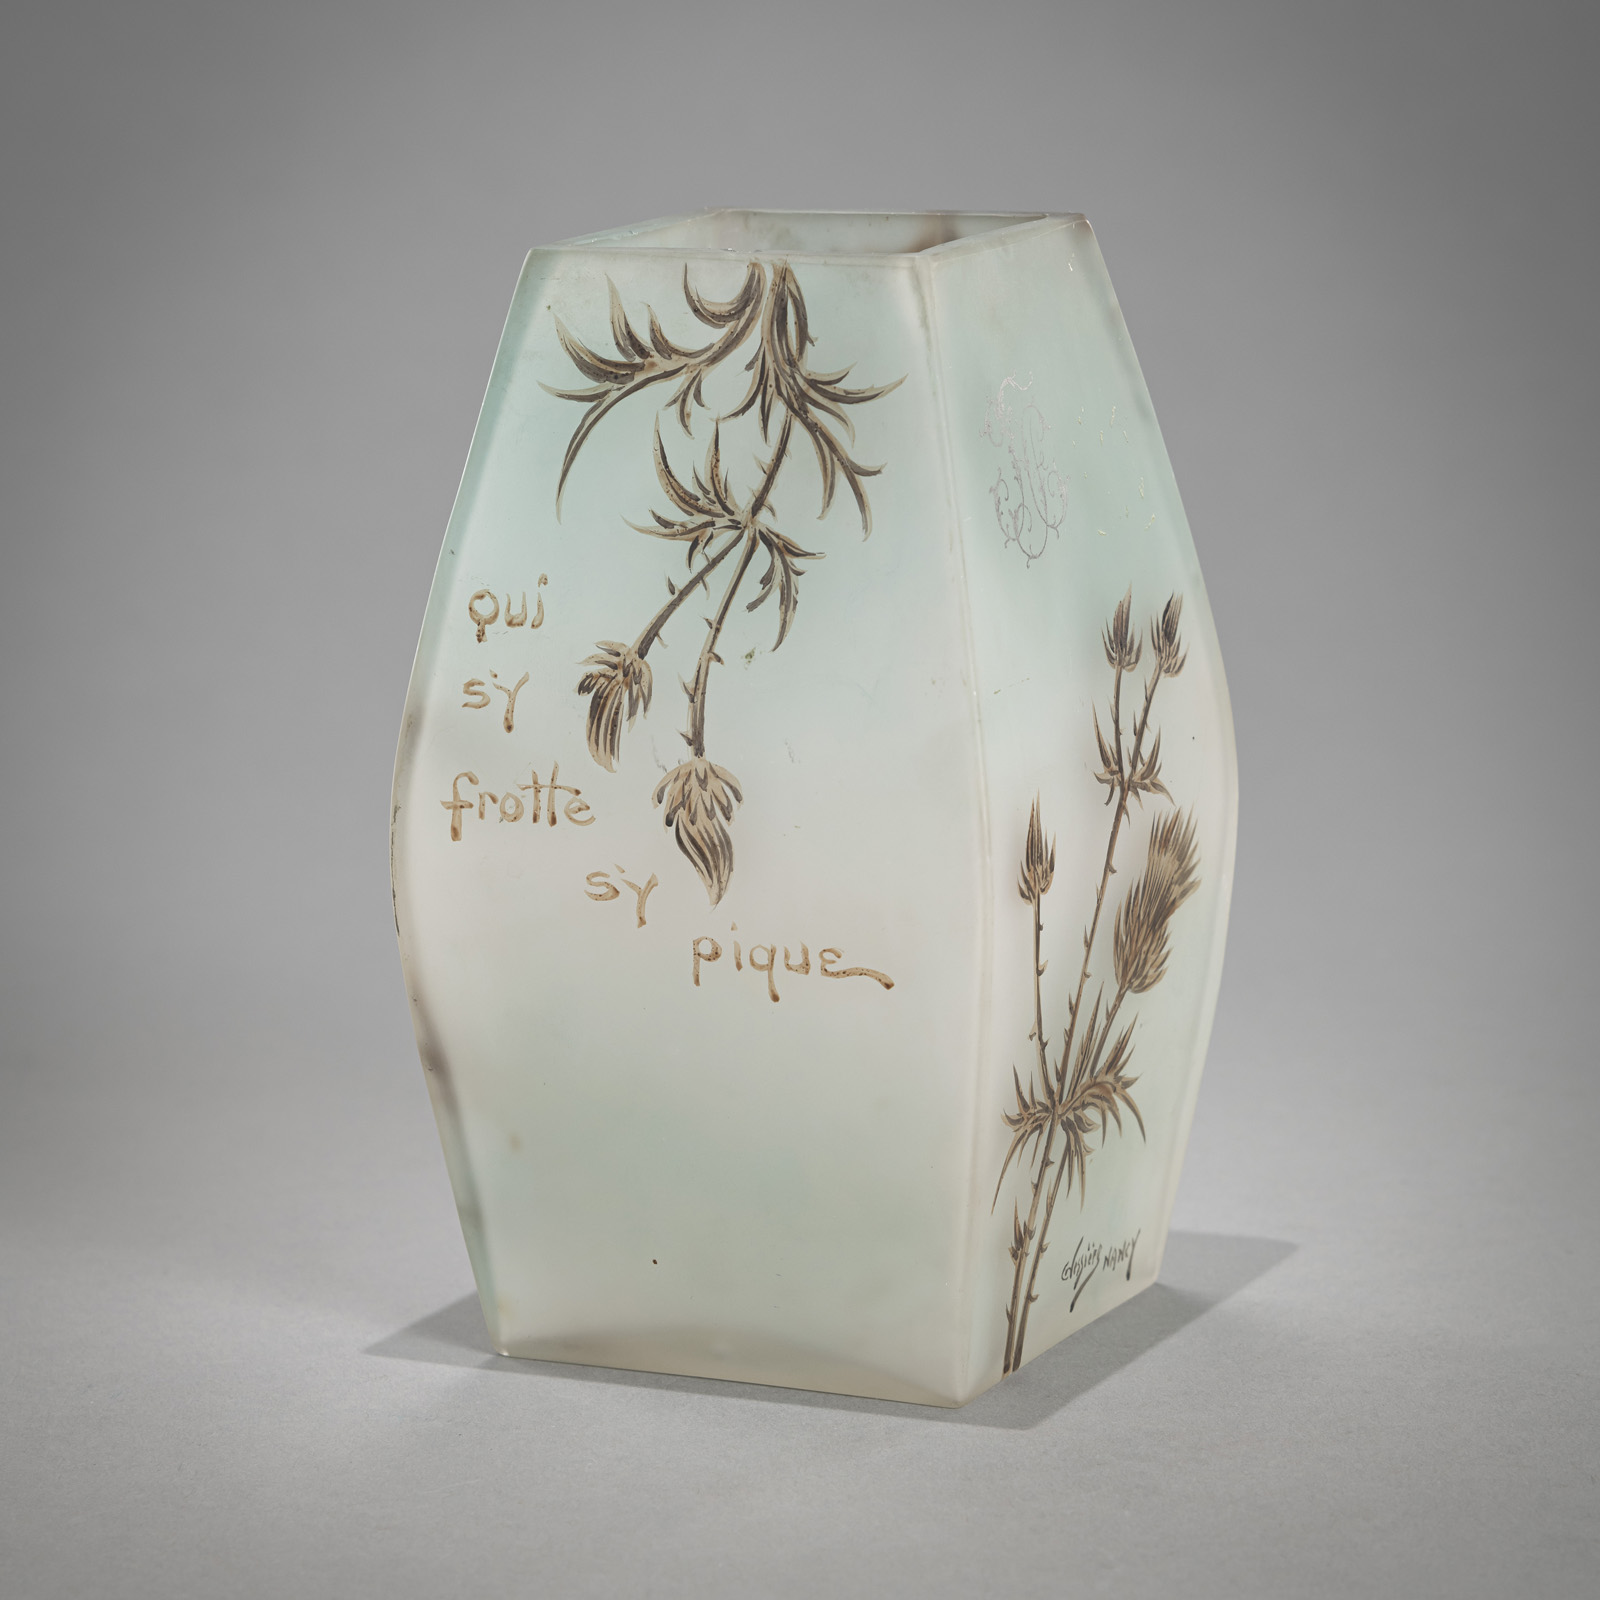 AN ENAMEL PAINTED THISTLE PATTERN GLASS VASE